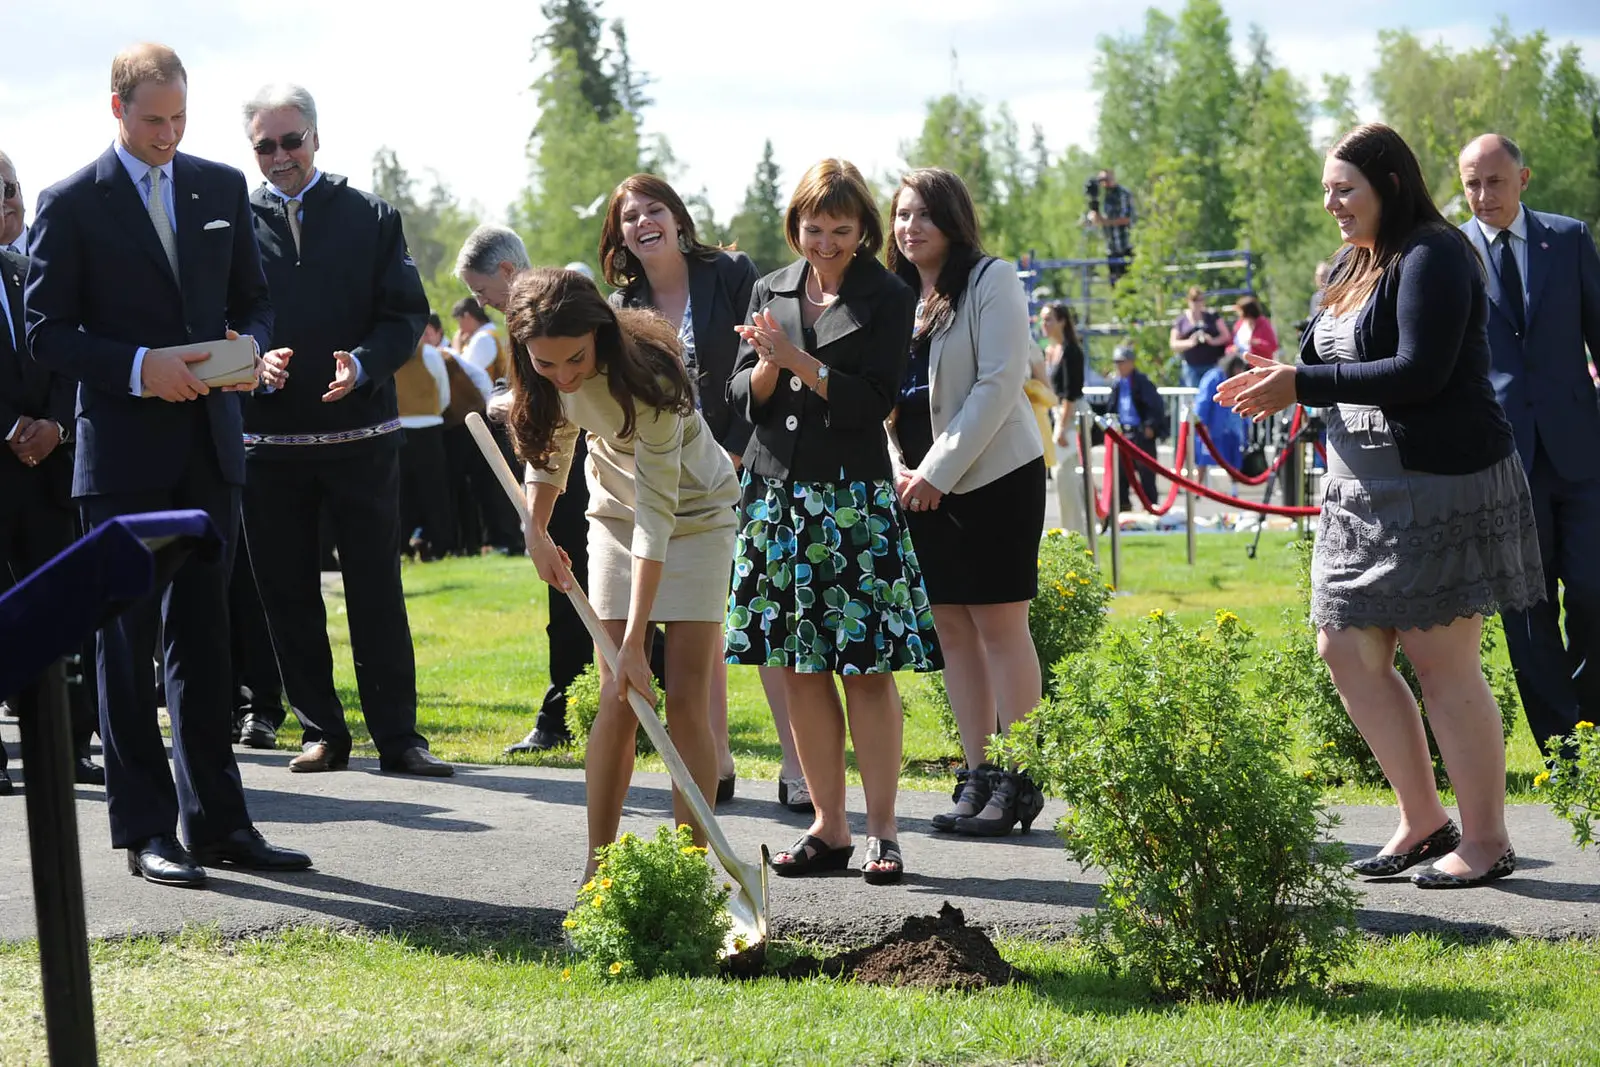 The Duke and Duchess of Cambridge planted a tree during Canada tour in 2011